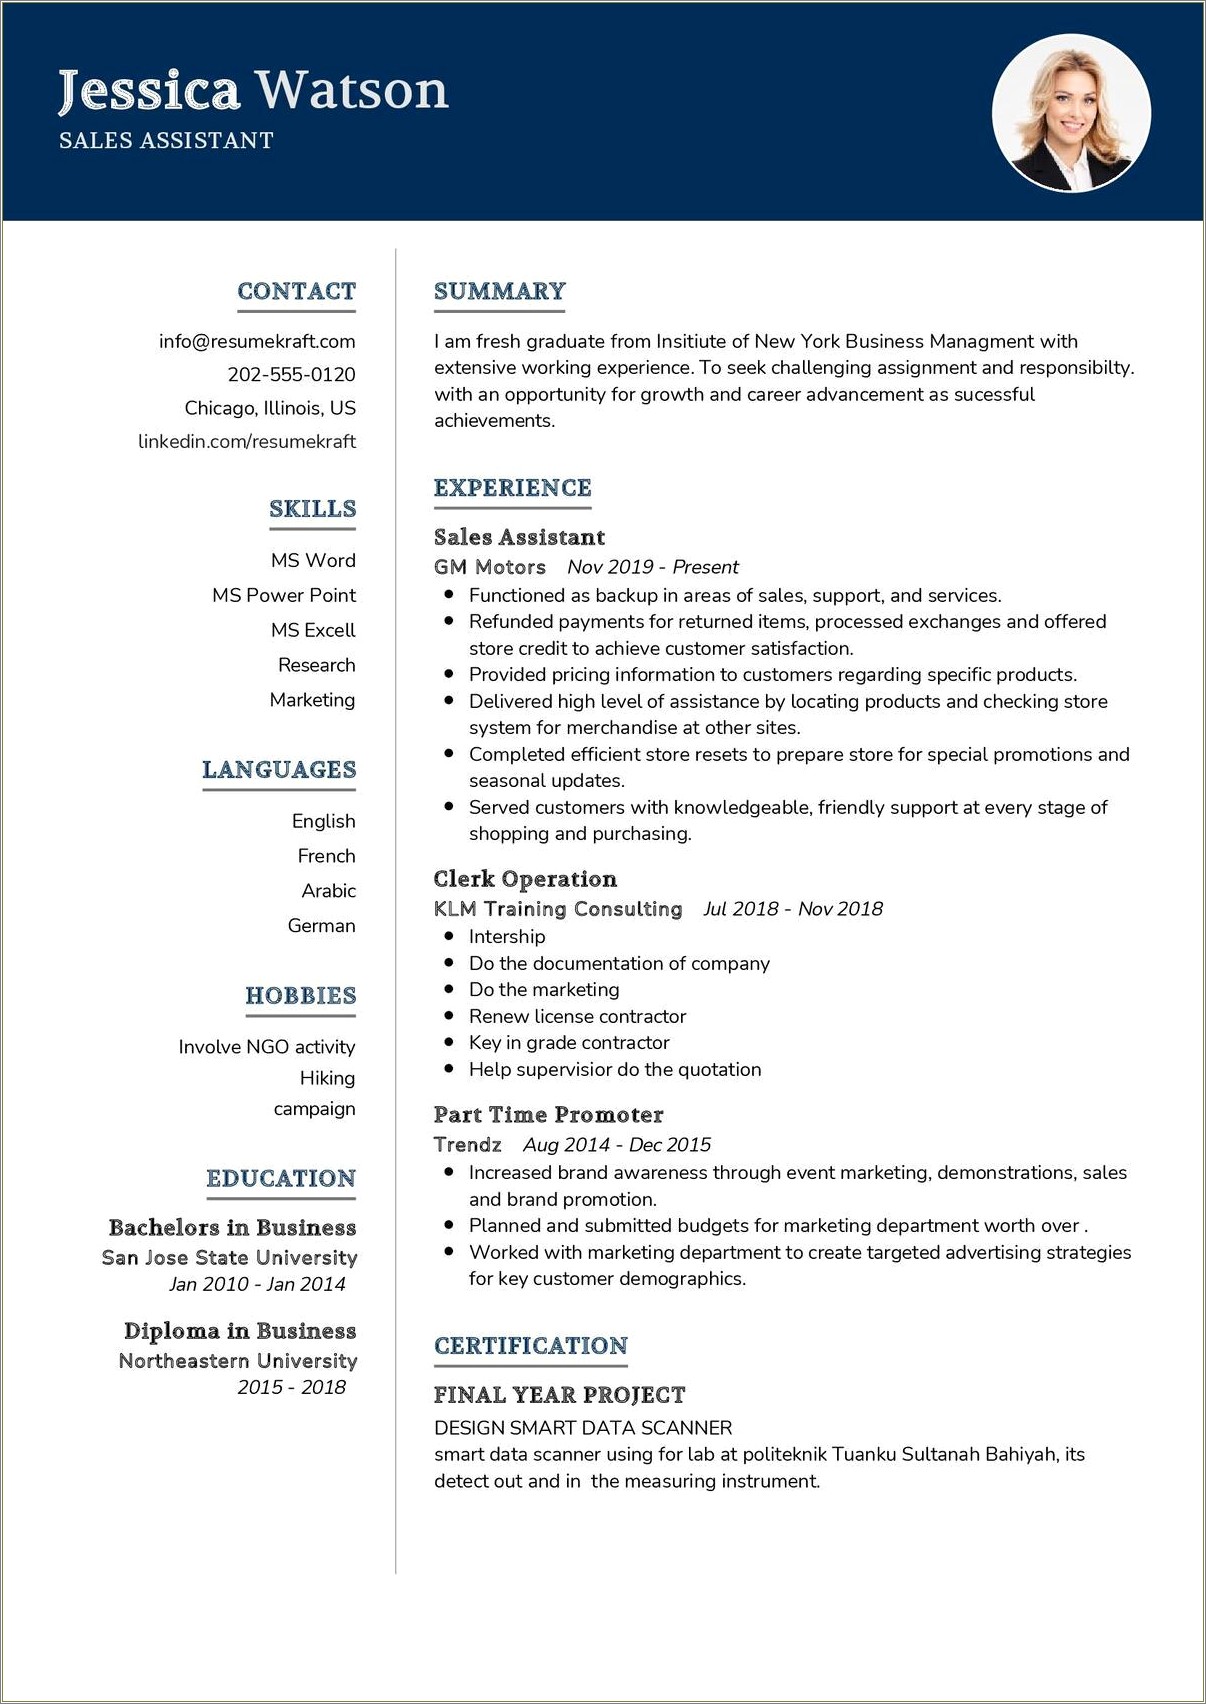 Resume To Work As A Sales Associate